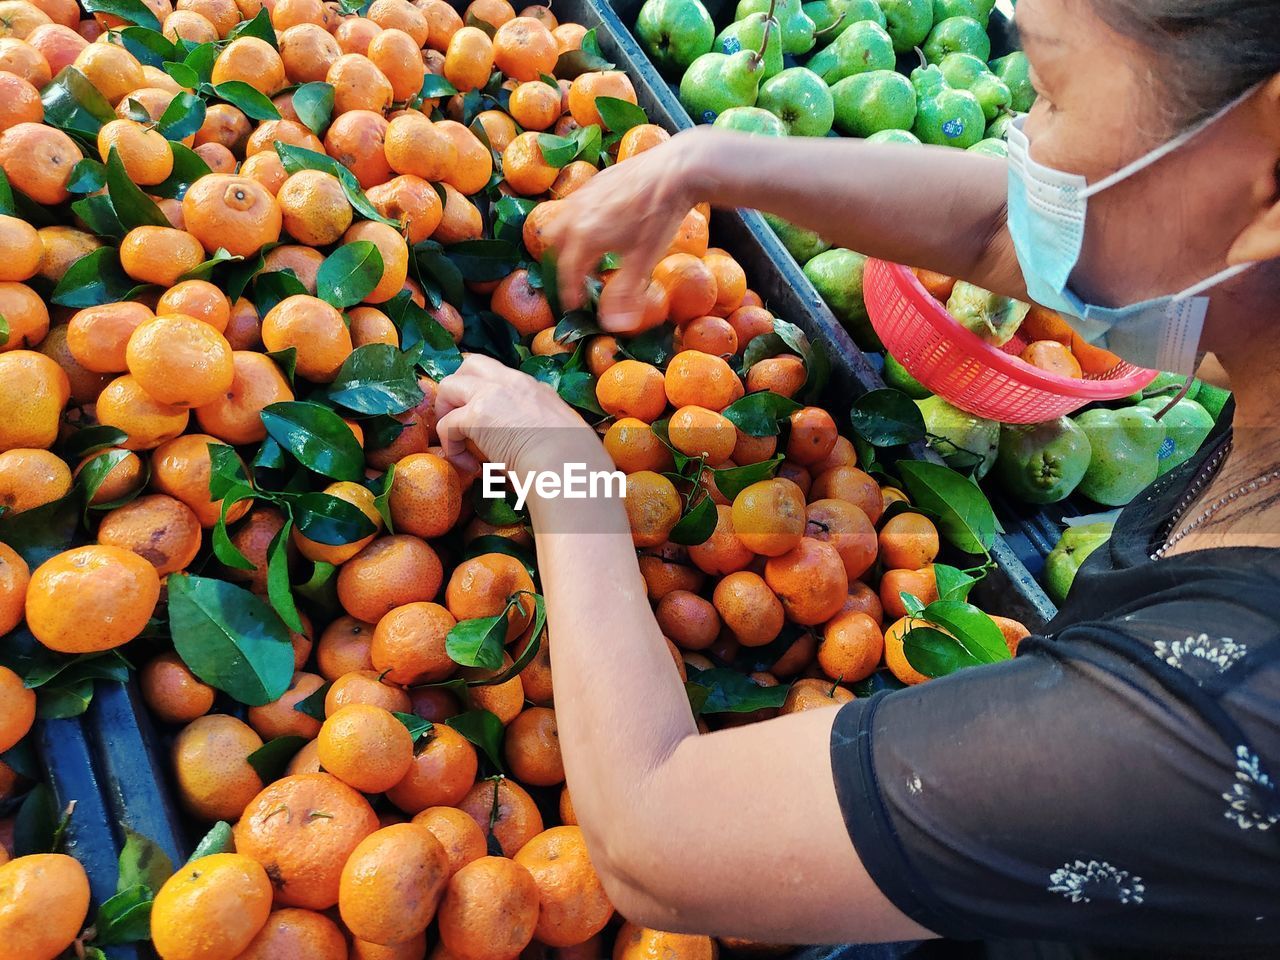 High angle view of orange fruits for sale in market